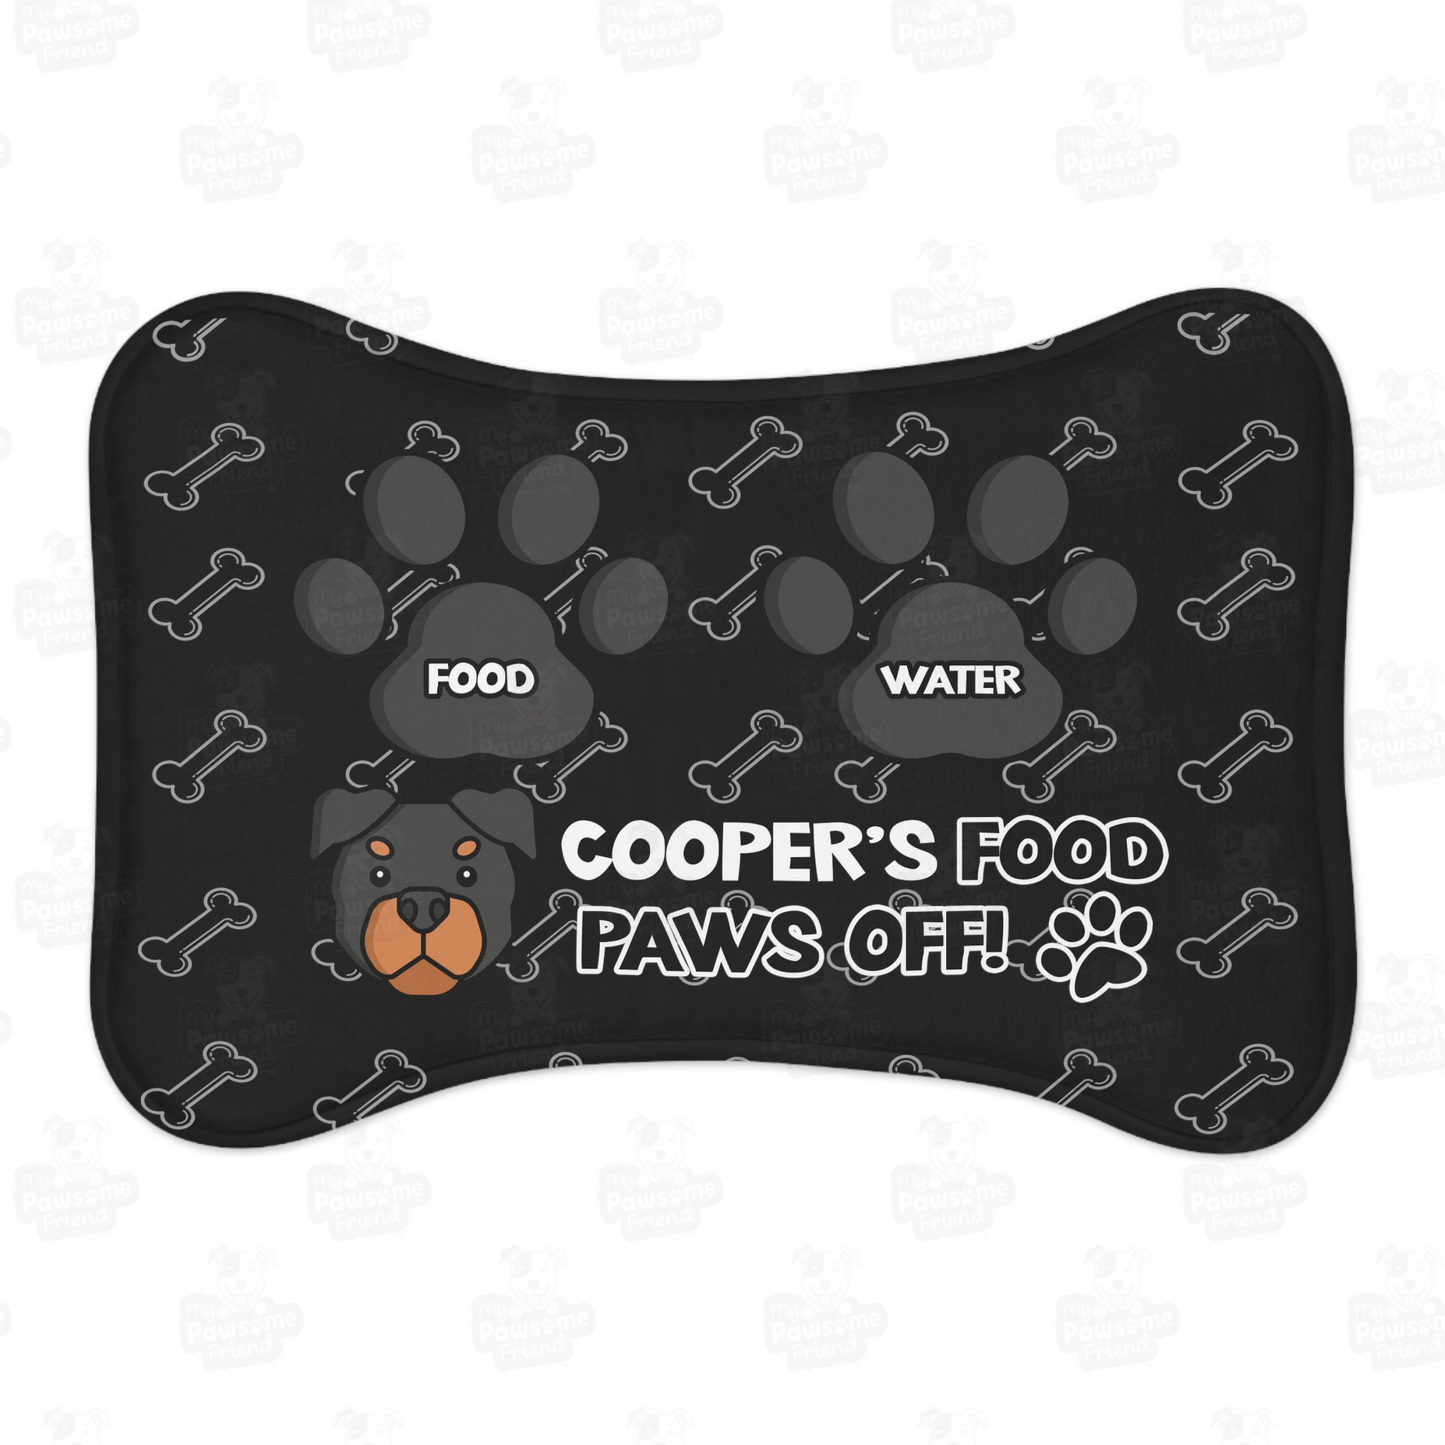 a personalized dog food mat with the a bone shape, two big paws with the words "Food" and "Water" at the top. And the face of a cute dog next to the words "Dog's Food Paws Off!". Color of the pet feeding mat is black